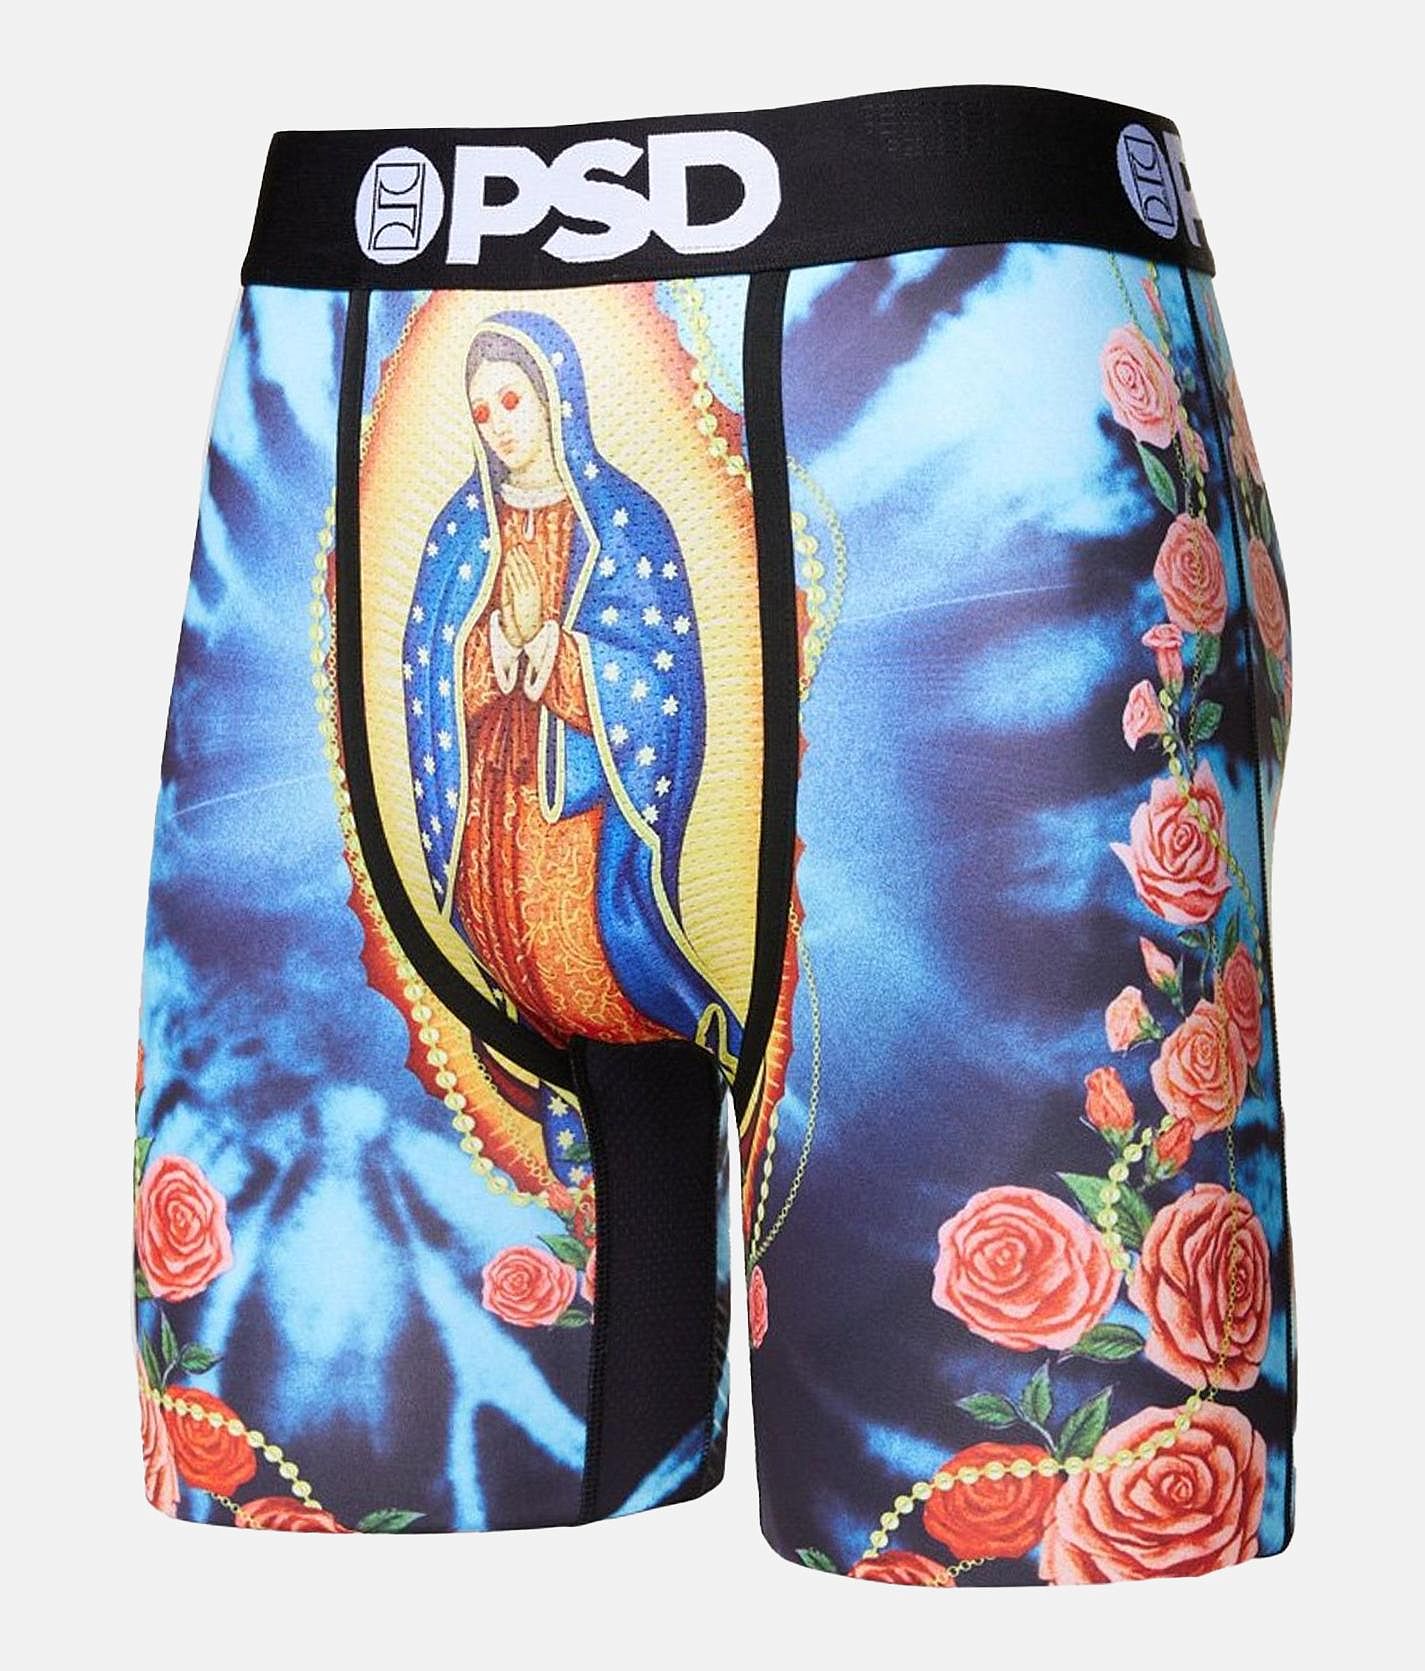 PSD Rose Mary Stretch Boxer Briefs - Men's Boxers in Multi